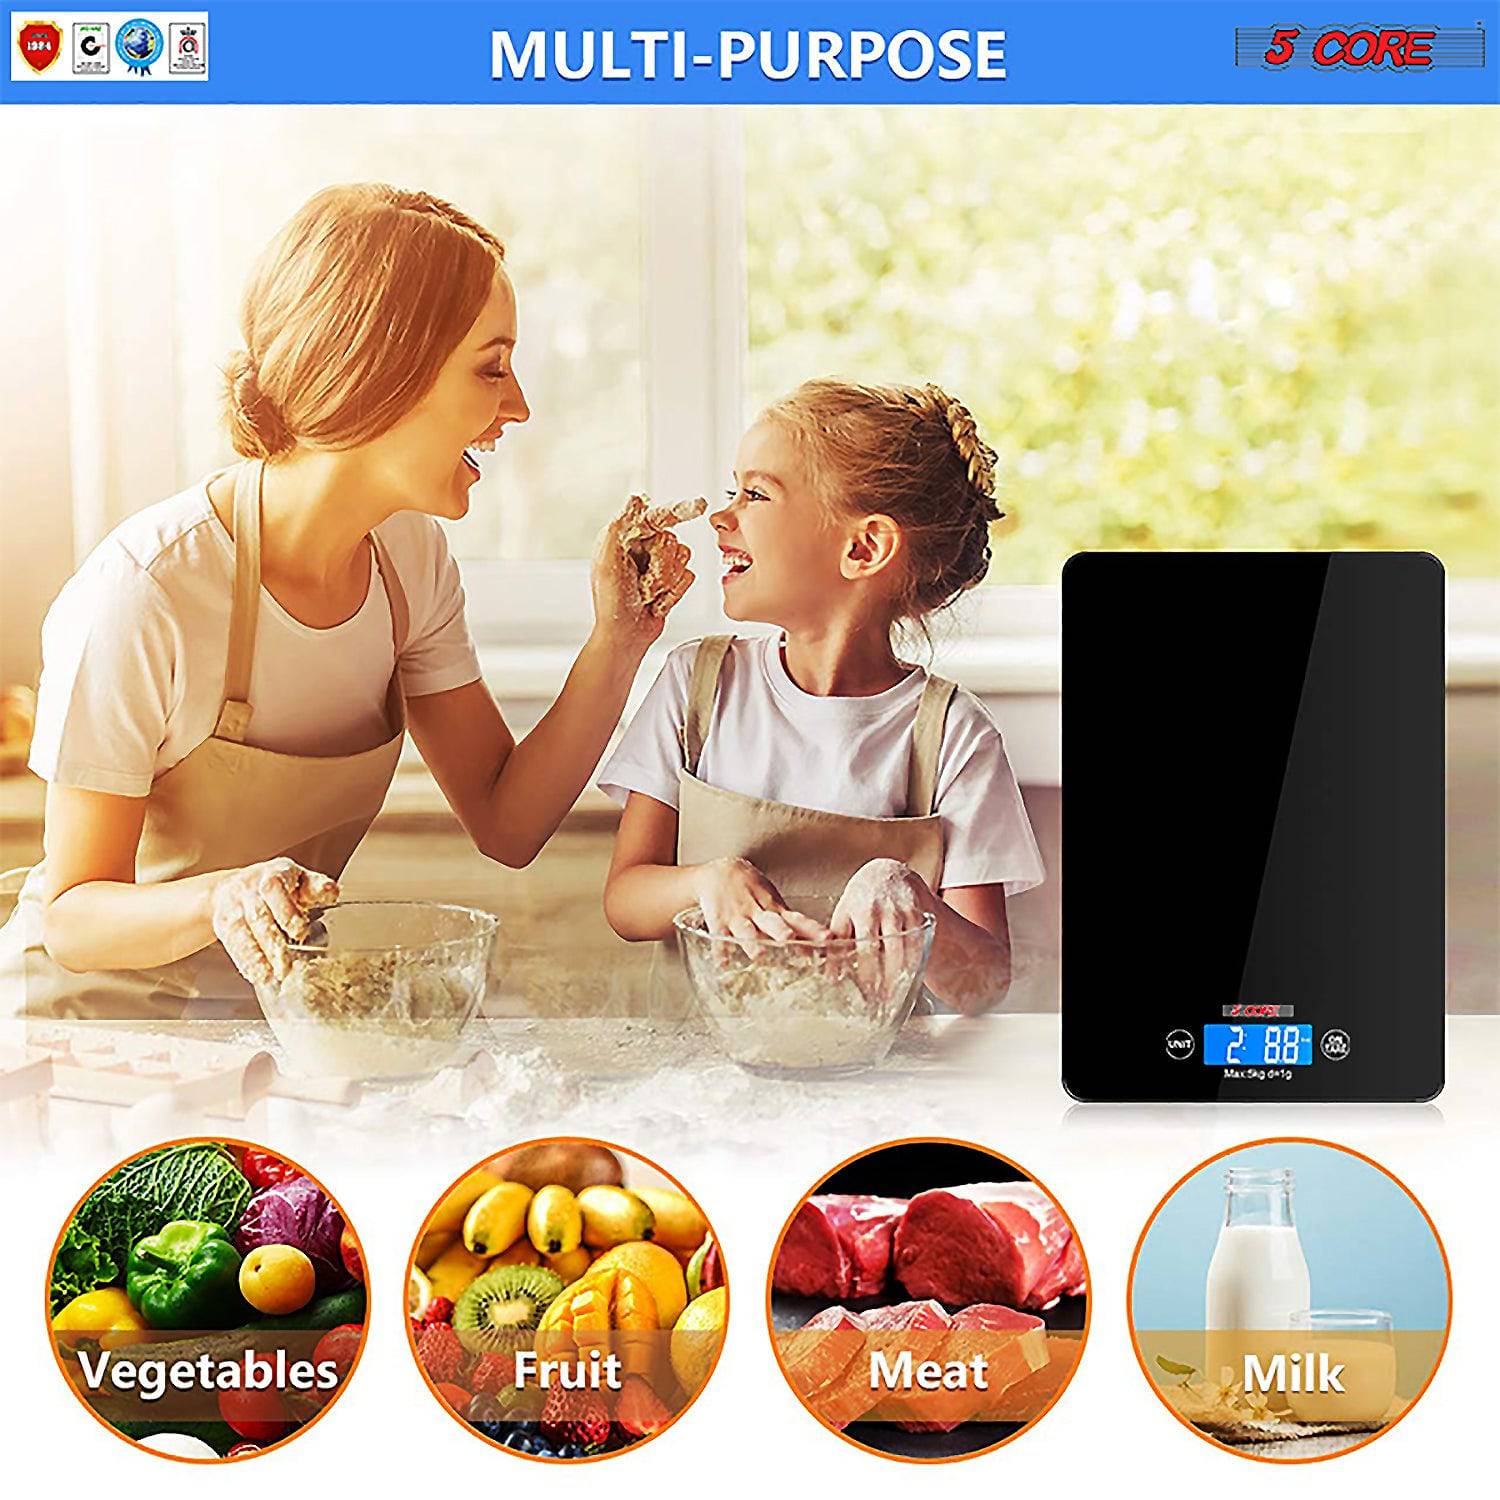 https://res.cloudinary.com/aeropost-inc/image/upload/IMX45W/5-core-kitchen-appliances-kitchen-scale-digital-food-diet-postal-scales-weight-bascula-touch-screen-5core-k-43-37490057674989__1004742583.jpg